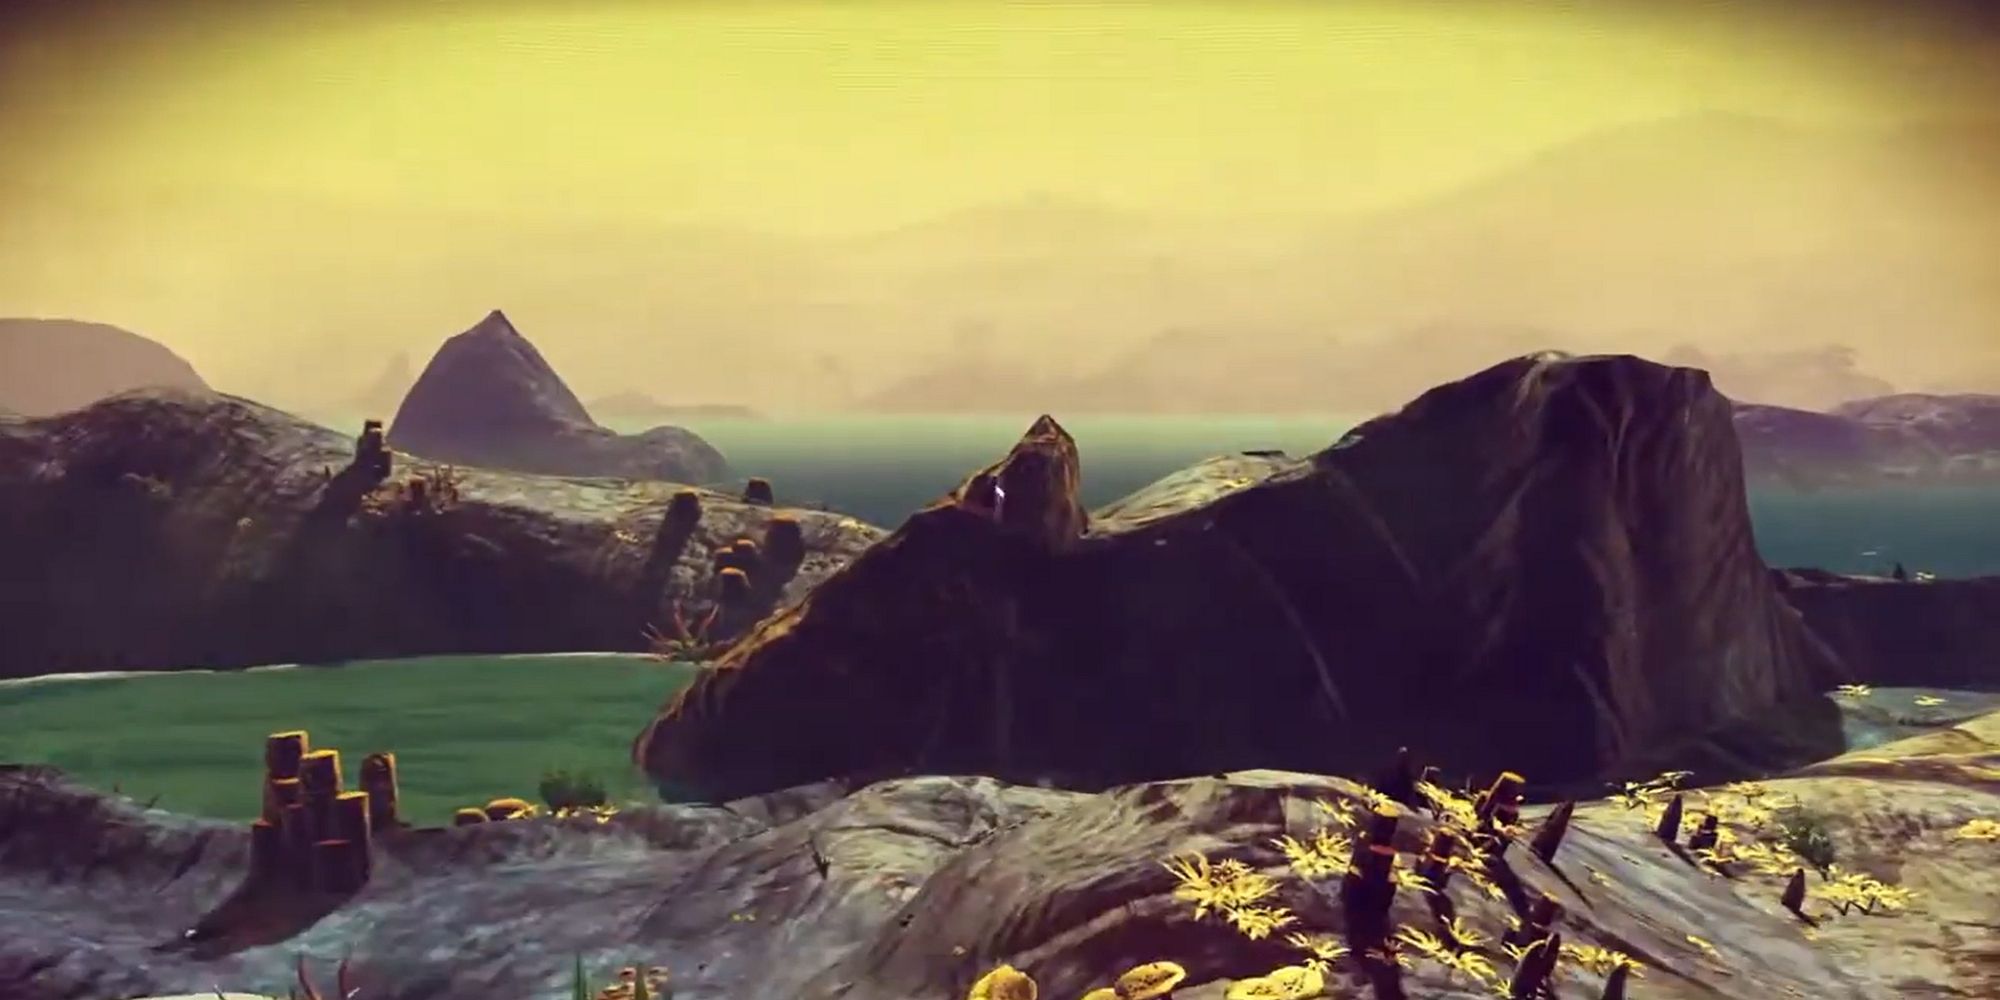 Explore a new planet in search of Galapagos achievements in No Man's Sky